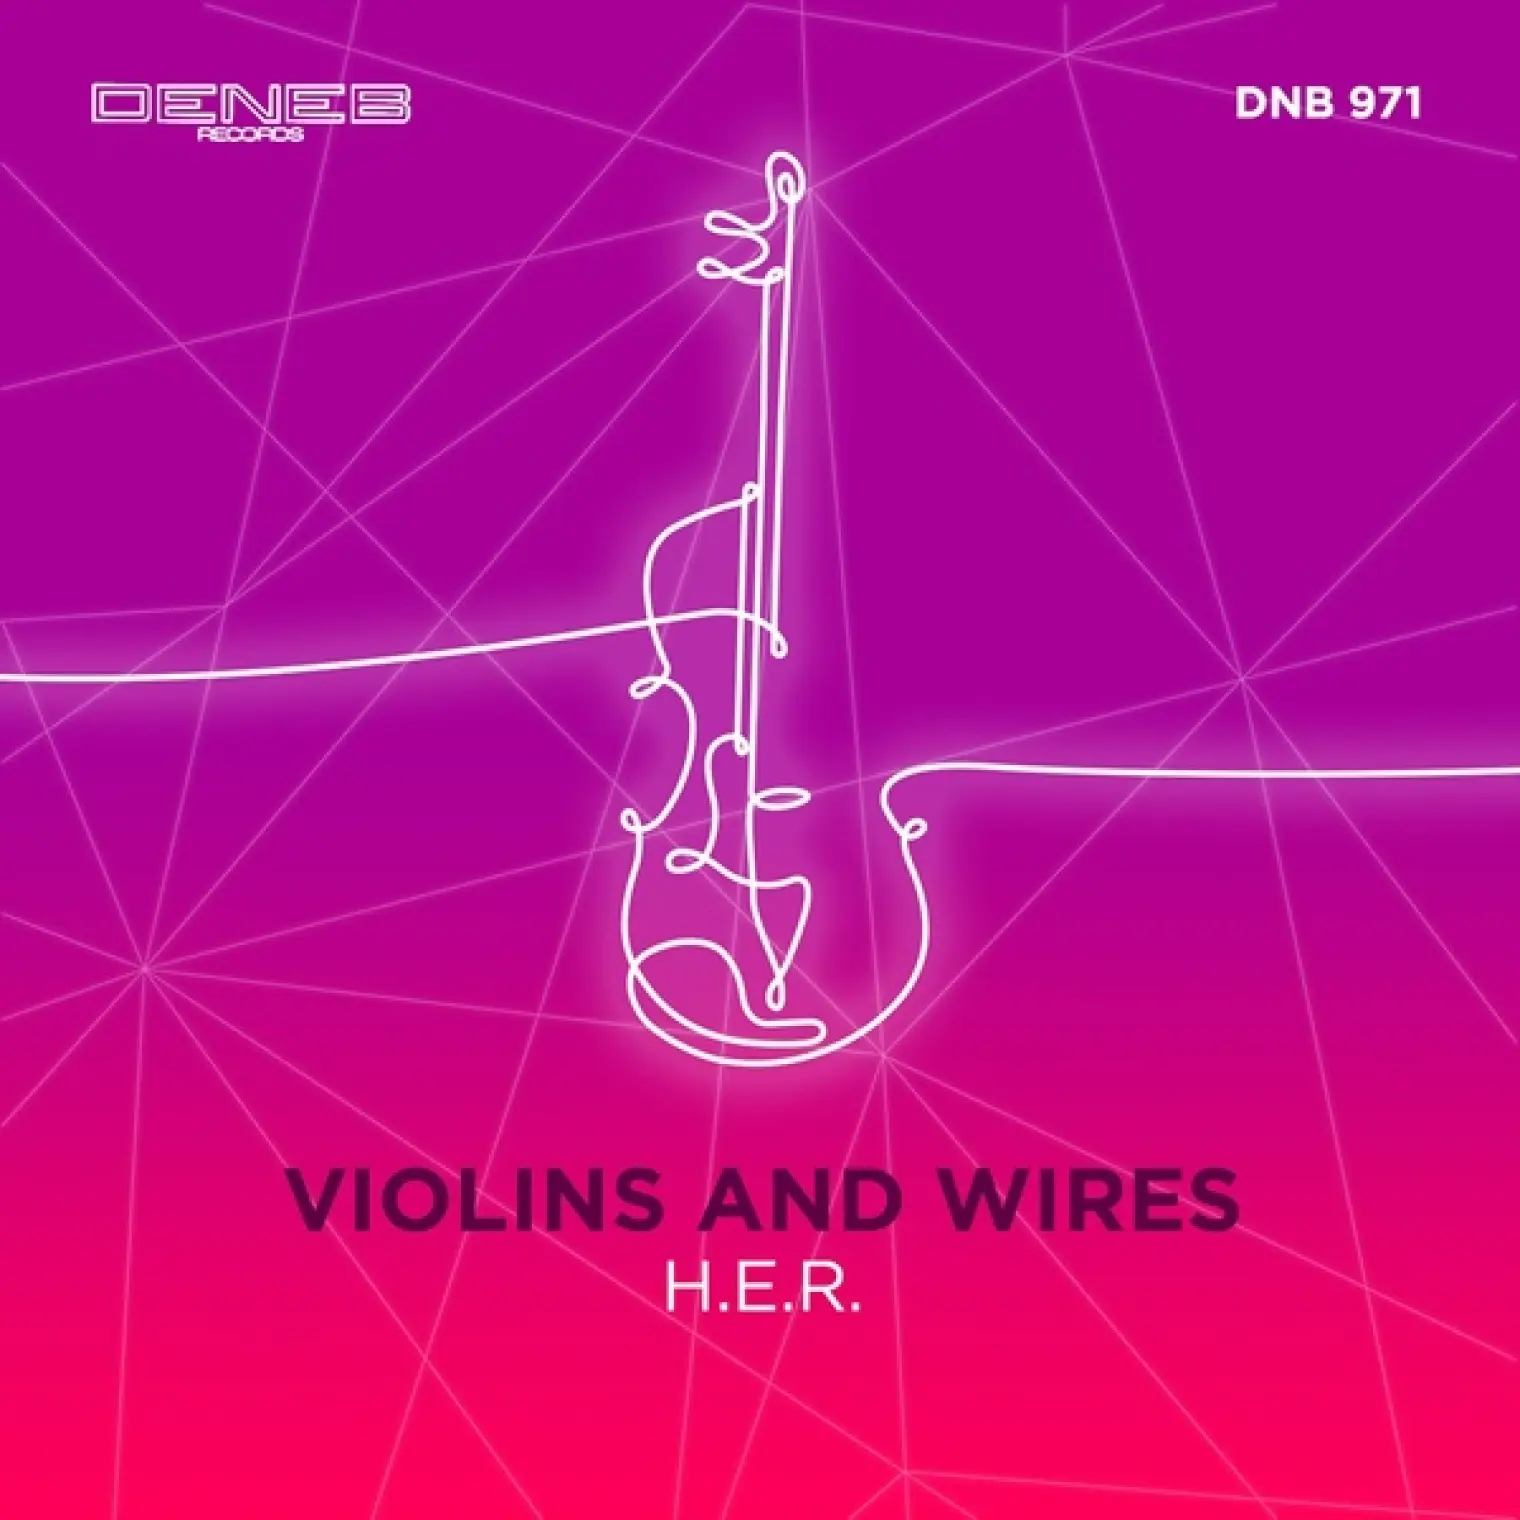 Violins And Wires -  H.E.R. 